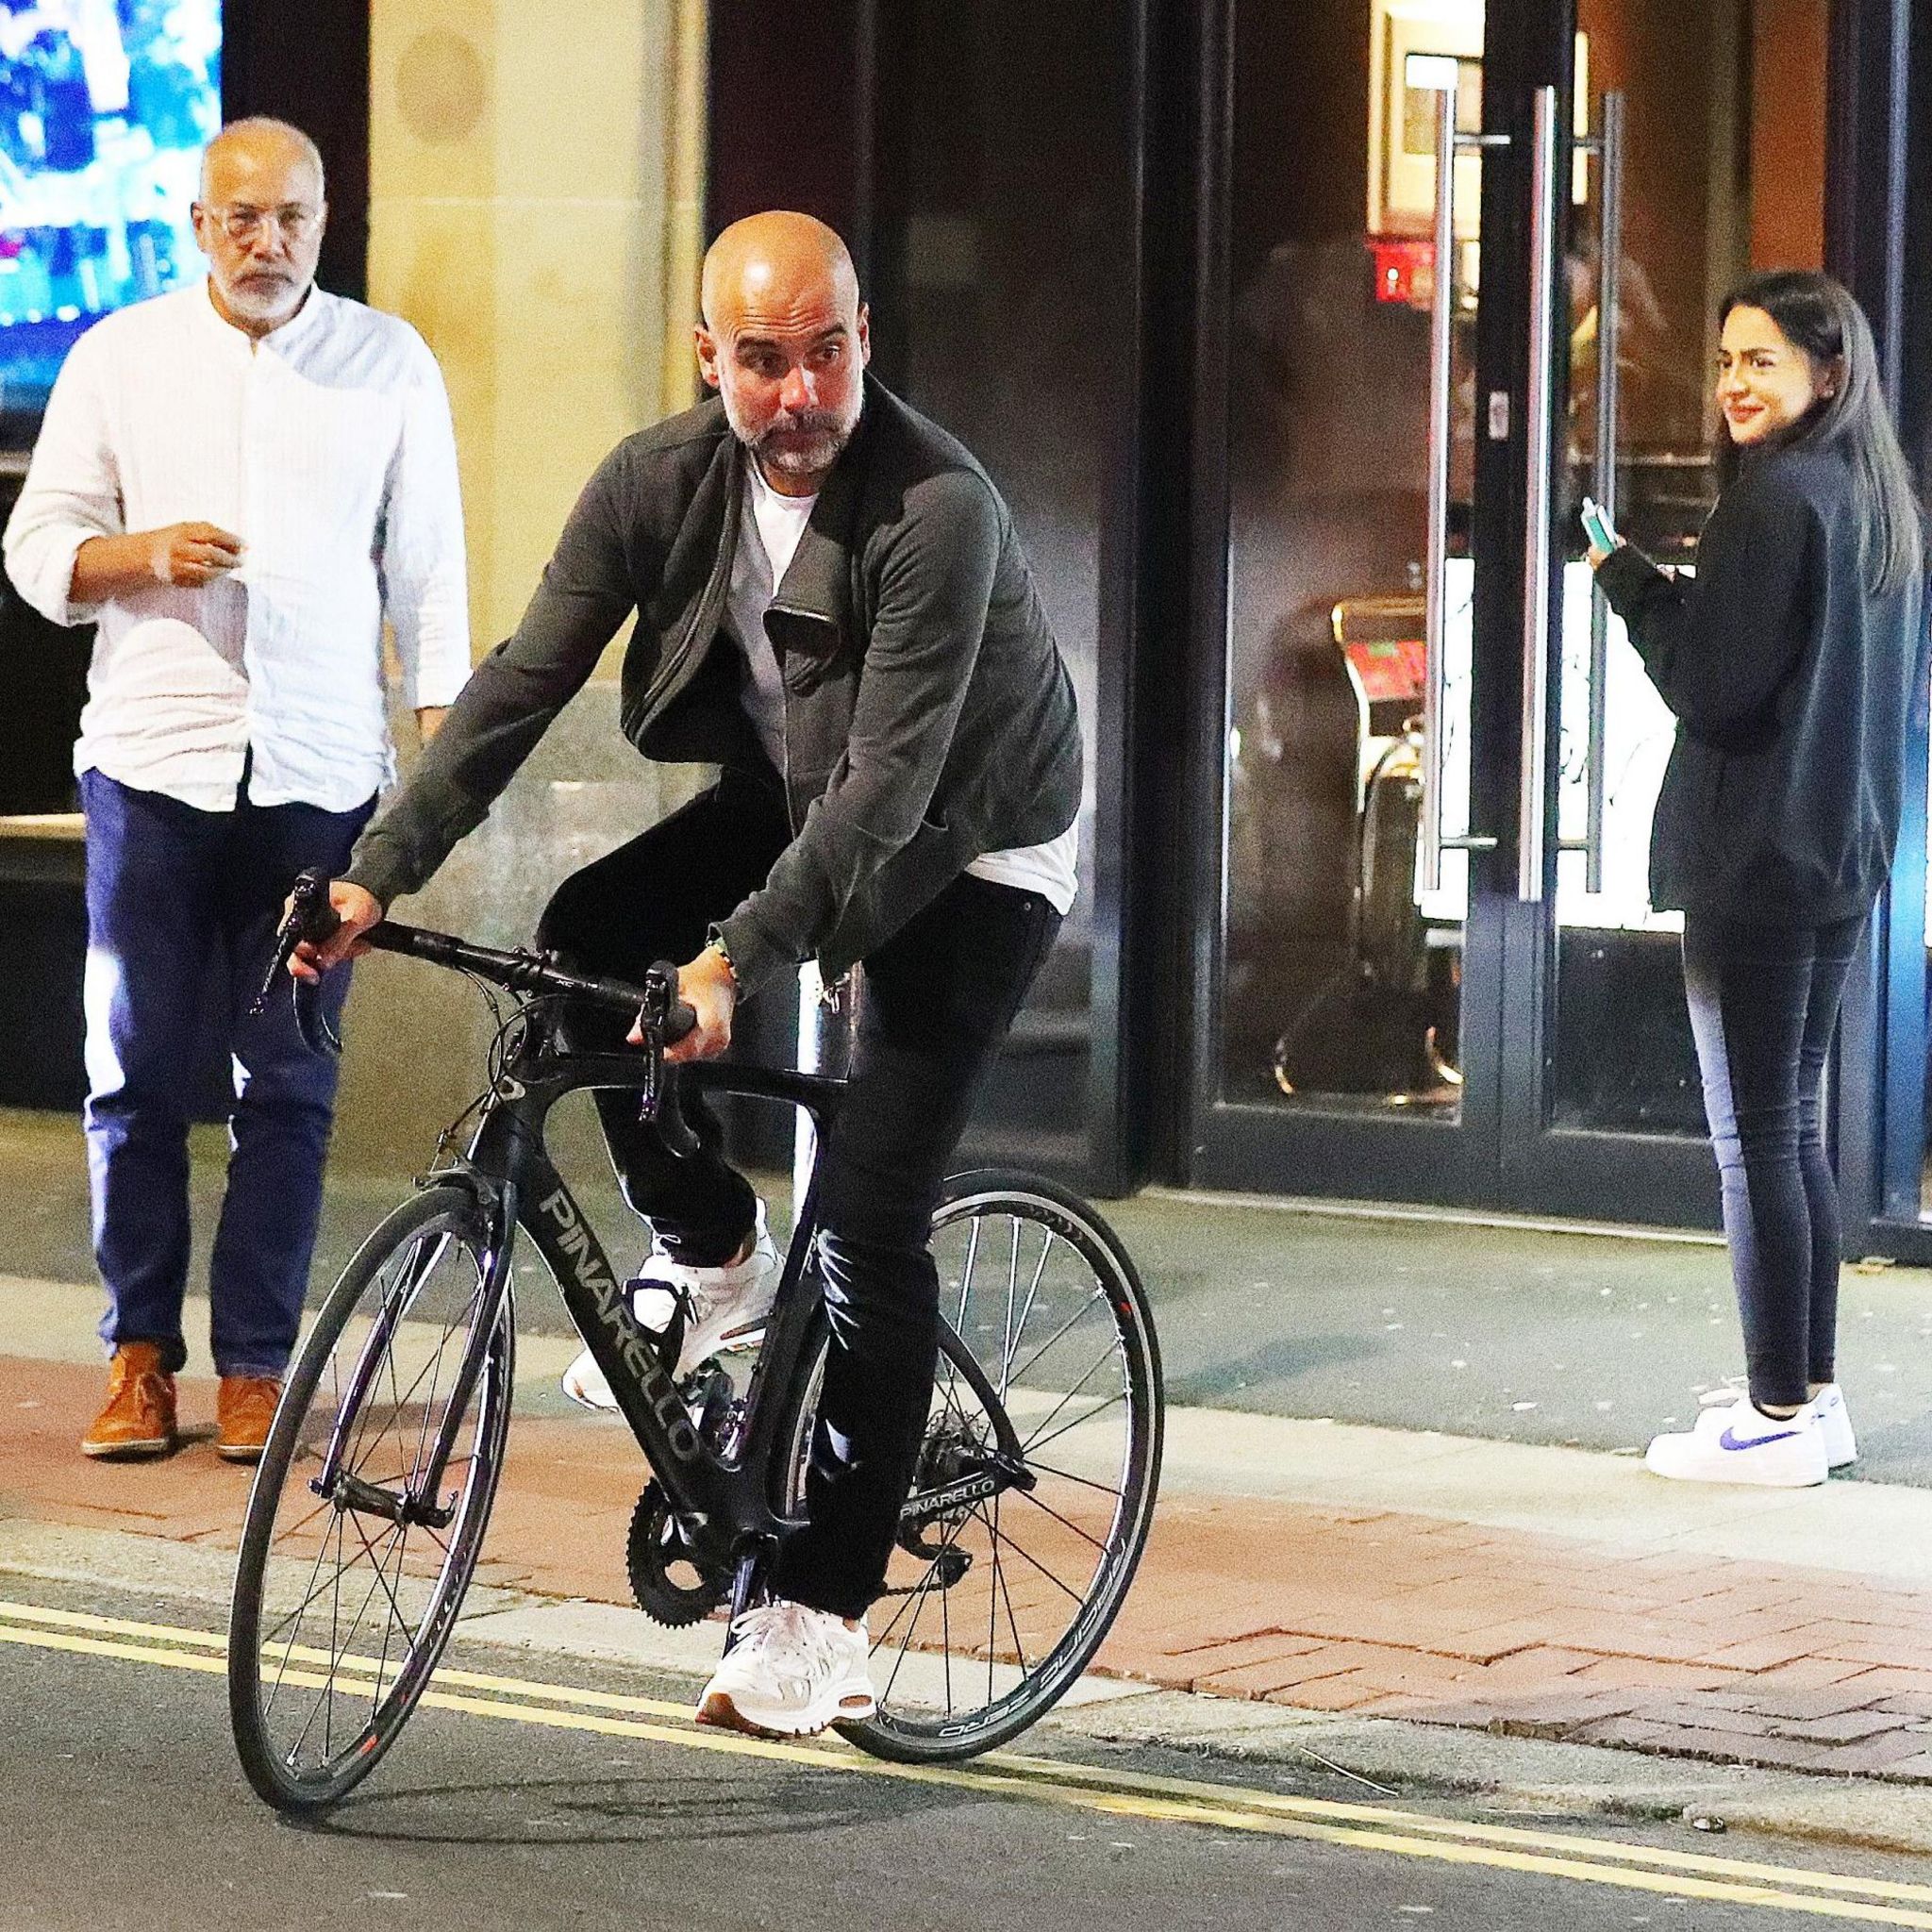 Pep Guardiola cycles away from a city-centre Manchester restaurant